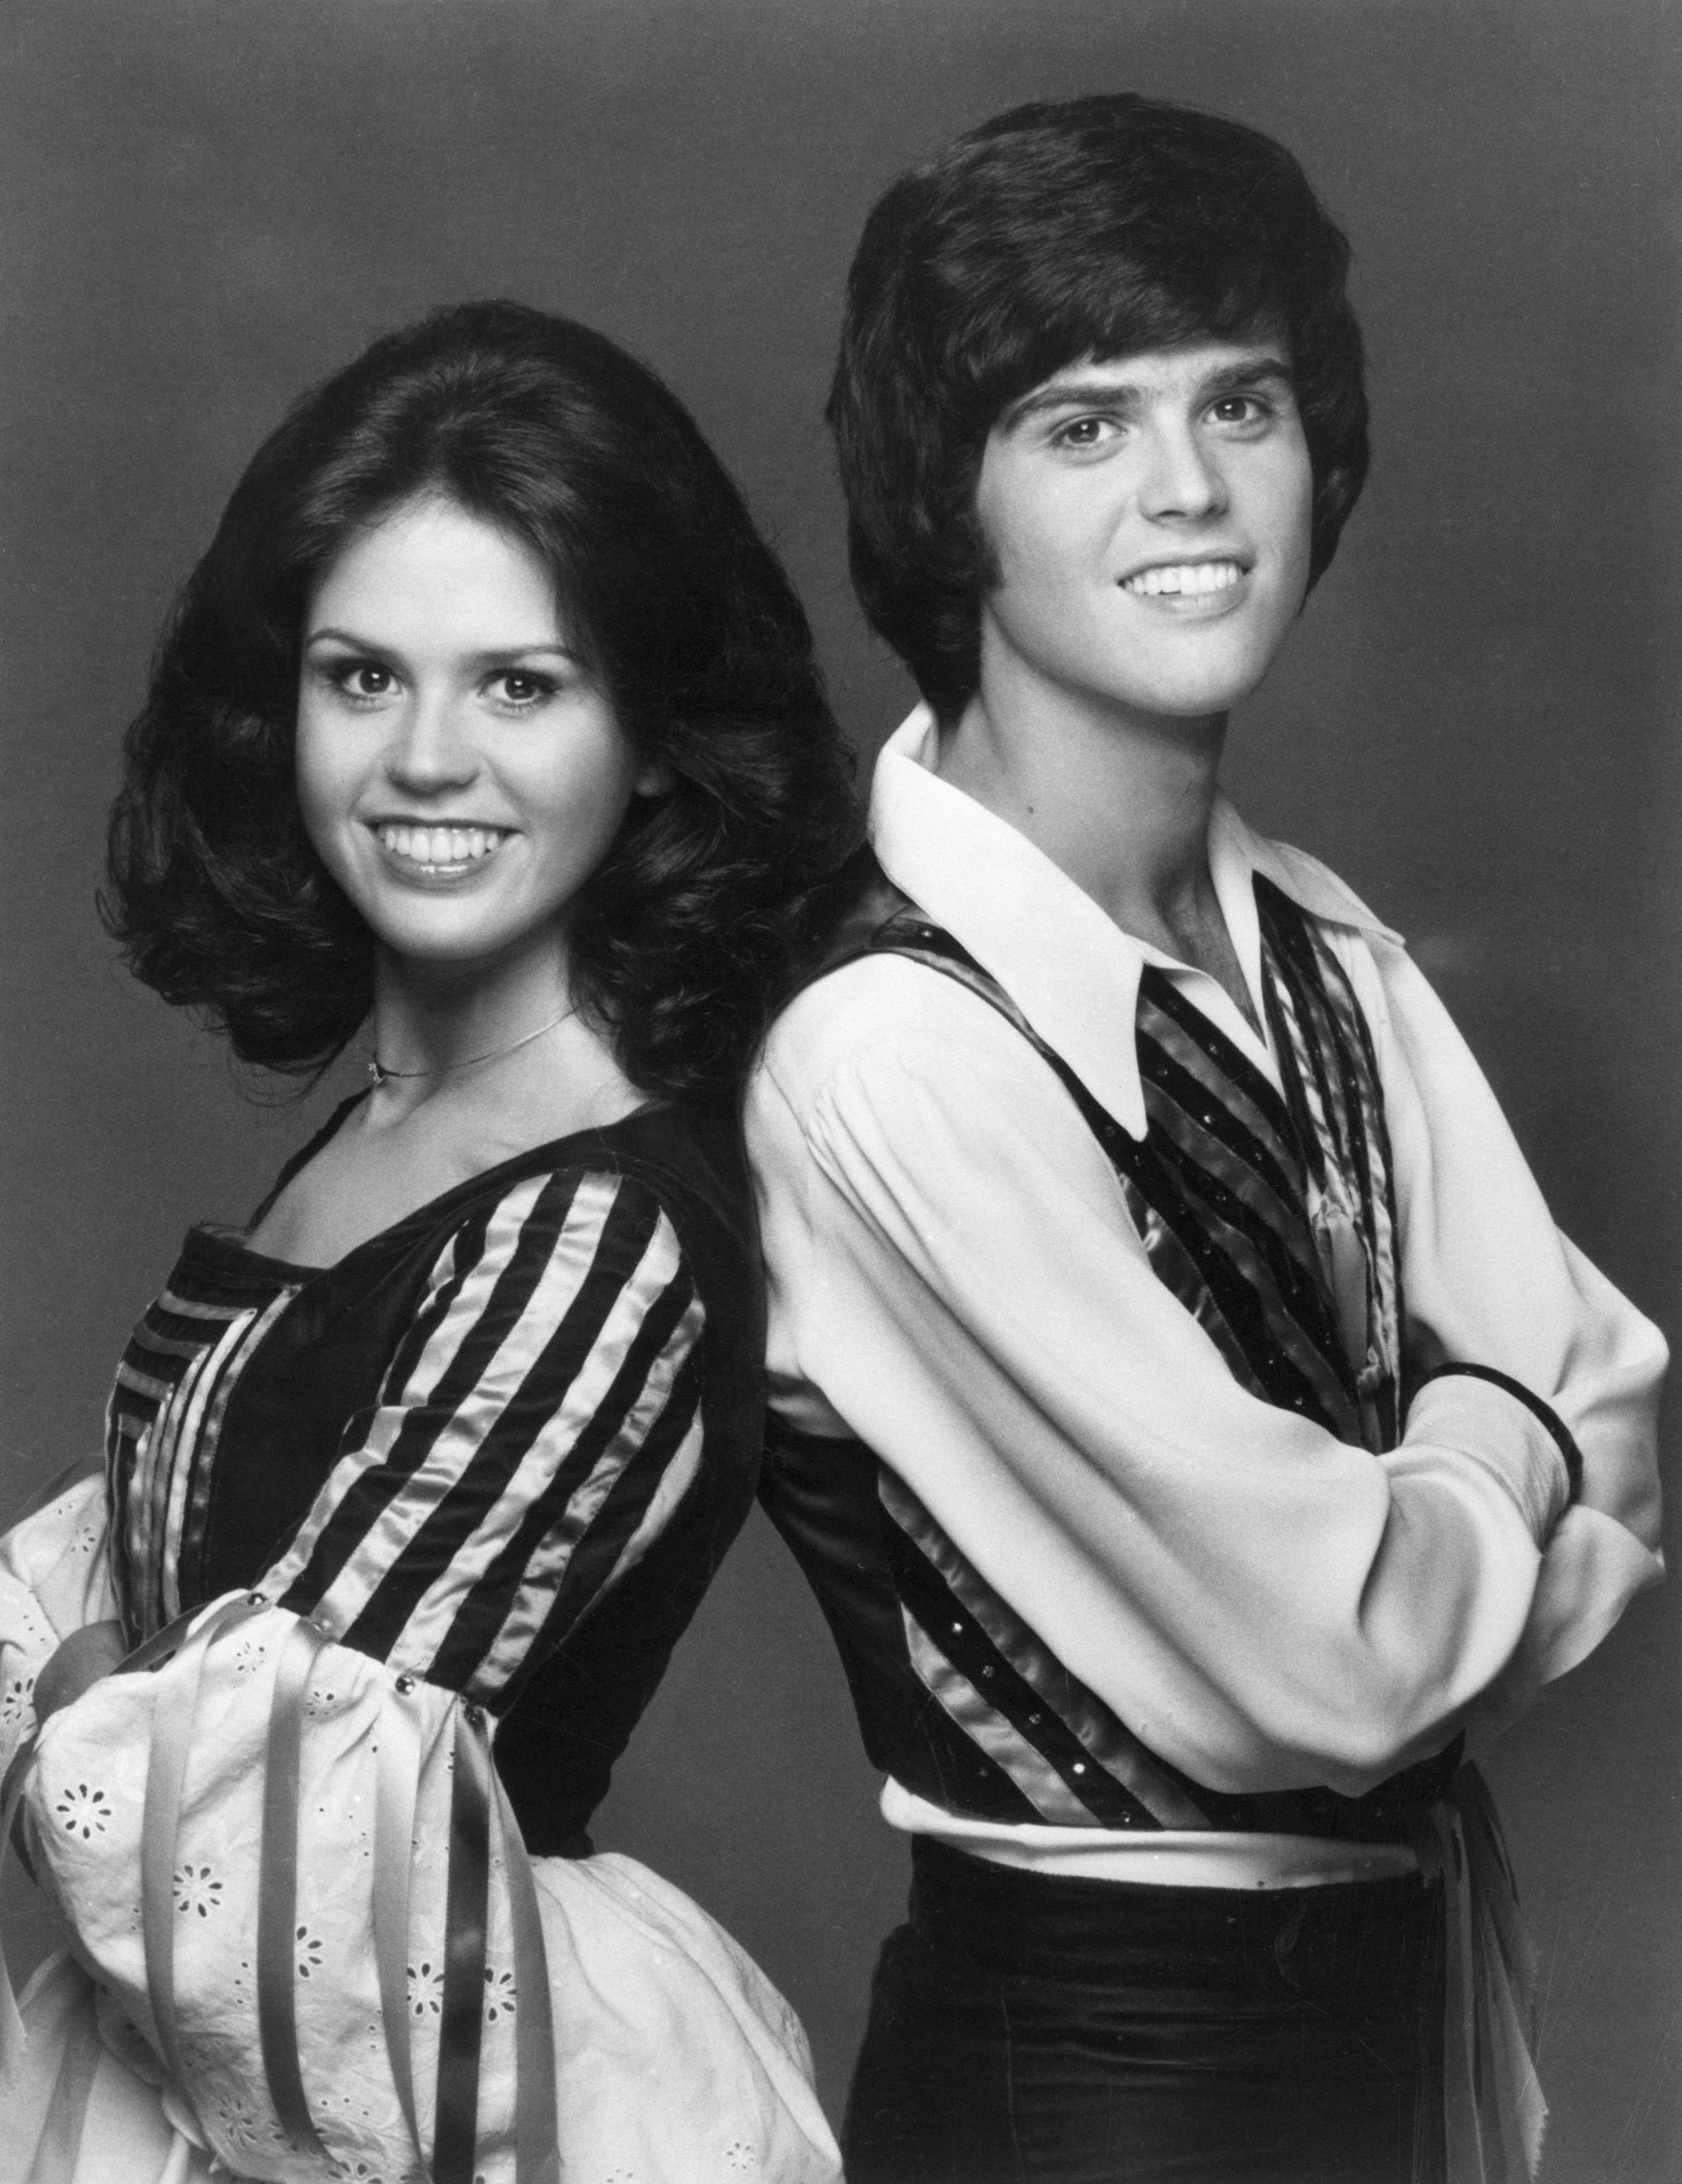 Marie and Donny Osmond posing in a black and white photograph in 1975. | Source: Getty Images